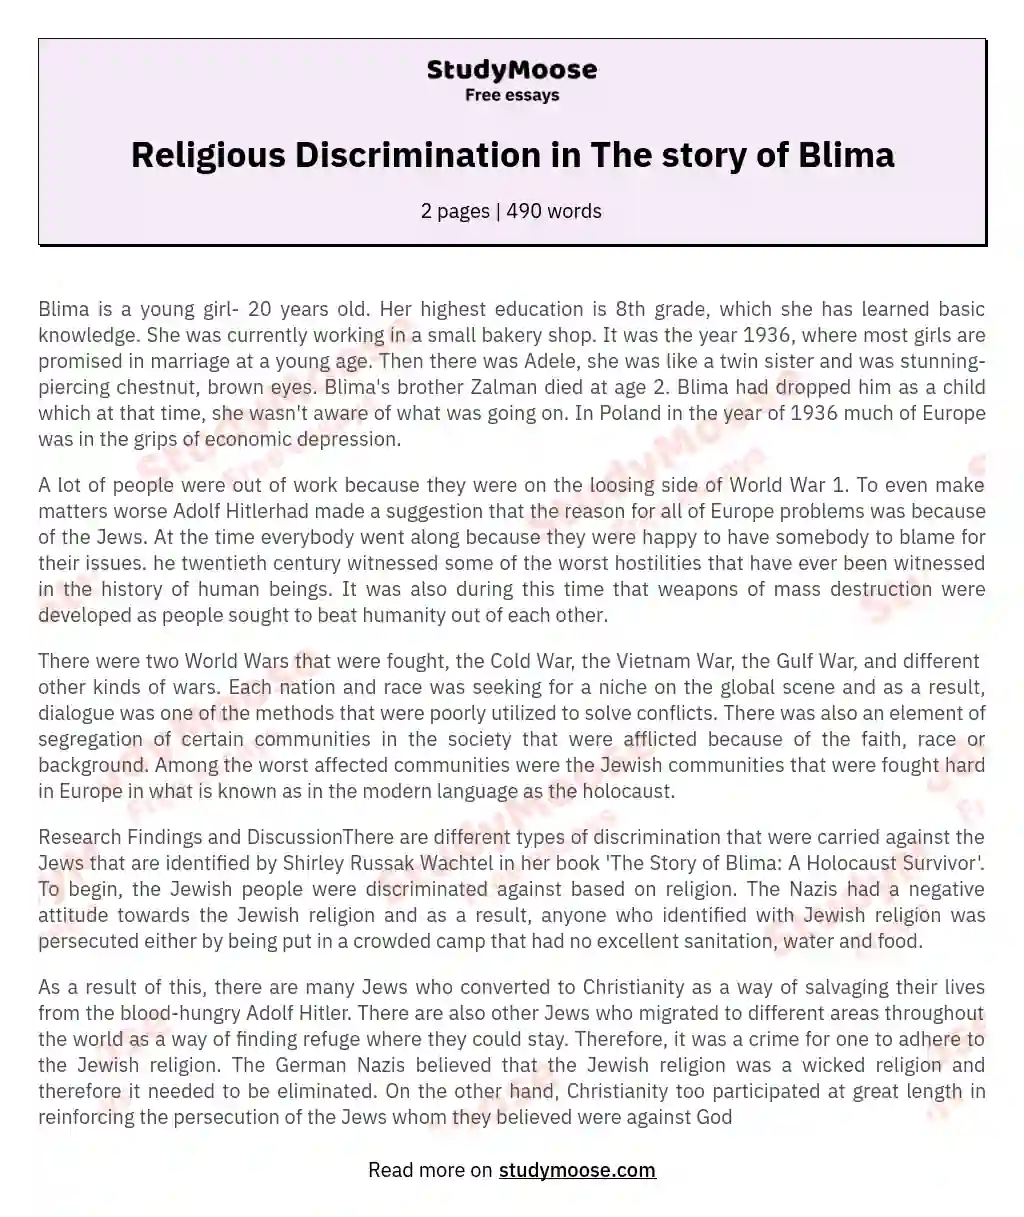 Religious Discrimination in The story of Blima essay